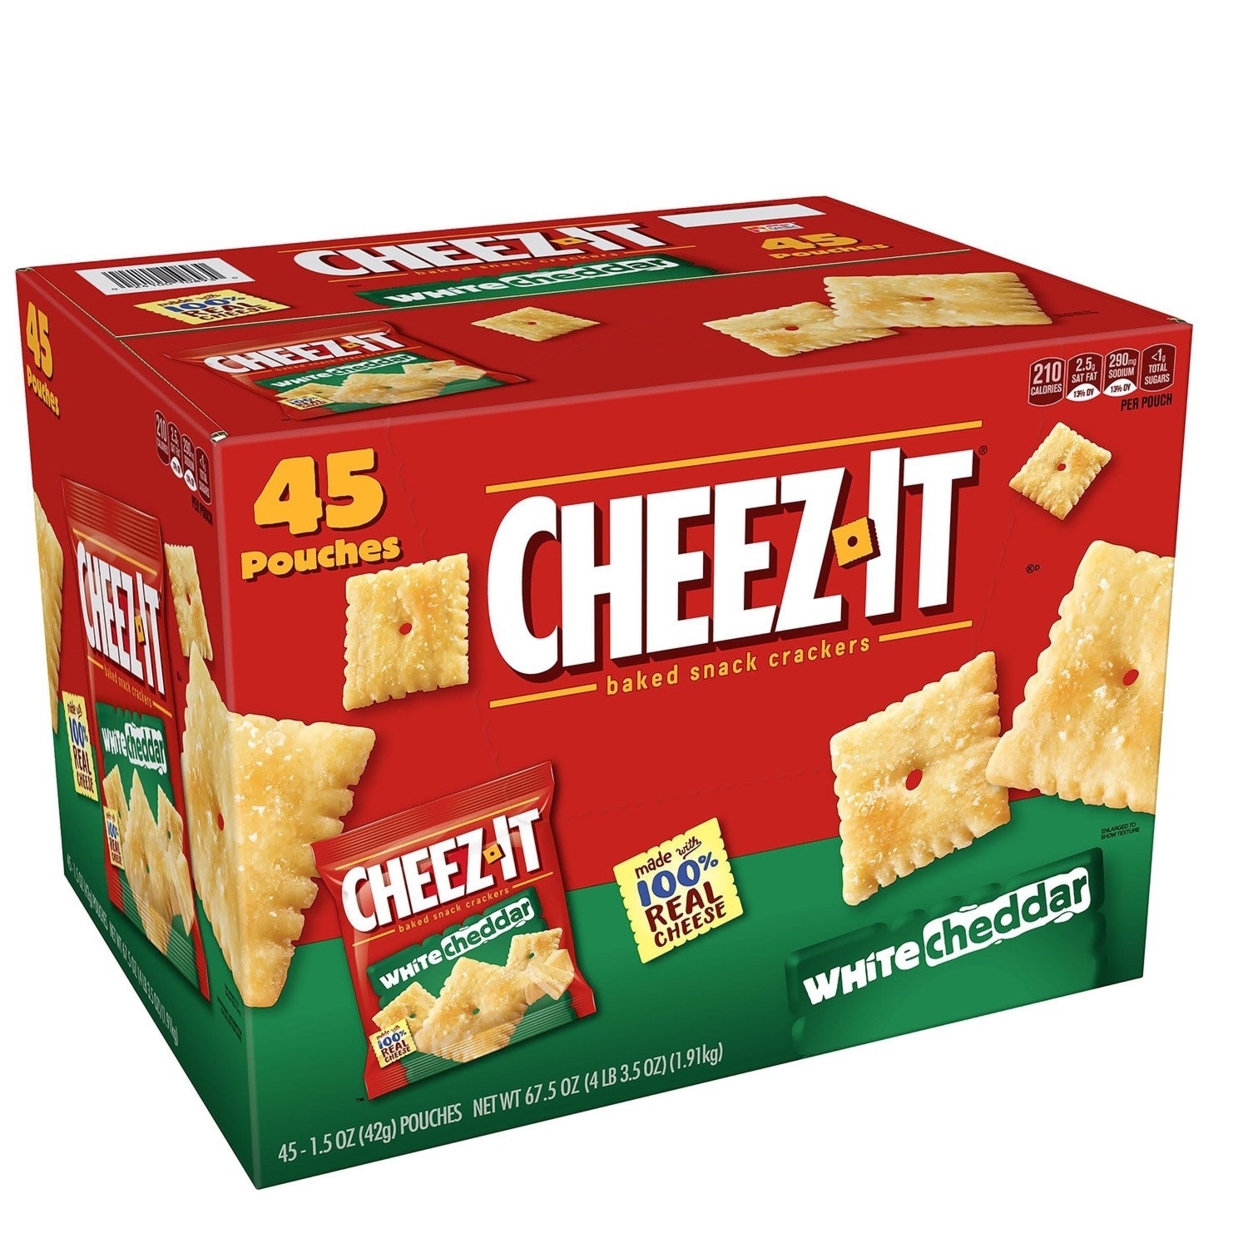 Cheez-It White Cheddar Crackers Snack Packs (1.5 Ounce Pouches, 45 Count)